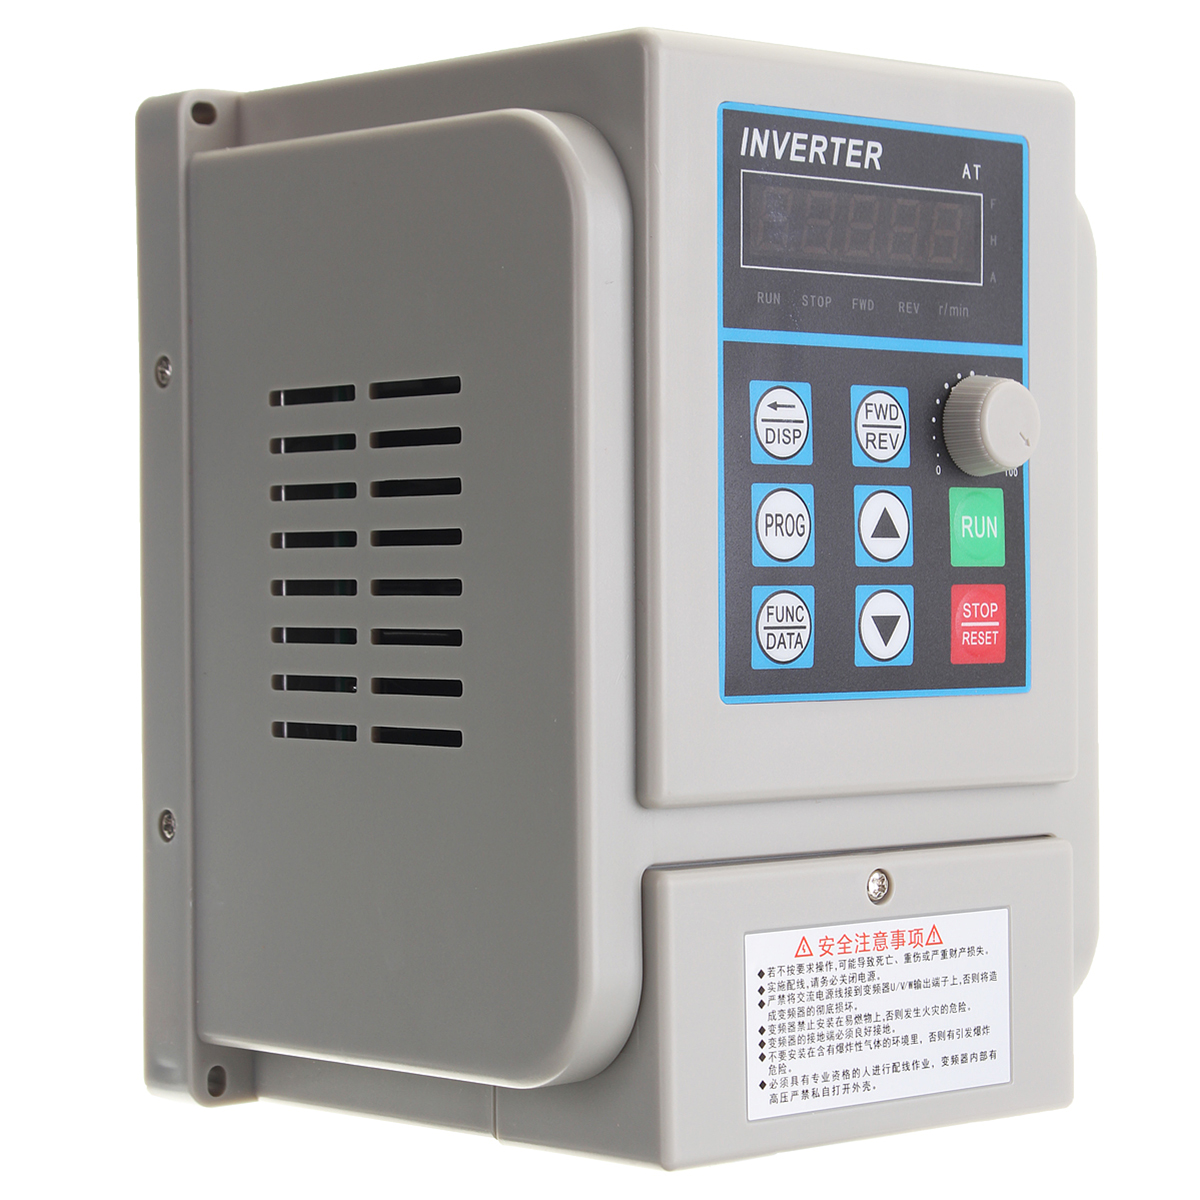 4KW-220V-20A-Single-Phase-Input-3-Phase-Output-PWM-Frequency-Converter-Drive-Inverter-5HP-VFD-VSD-1286175-4